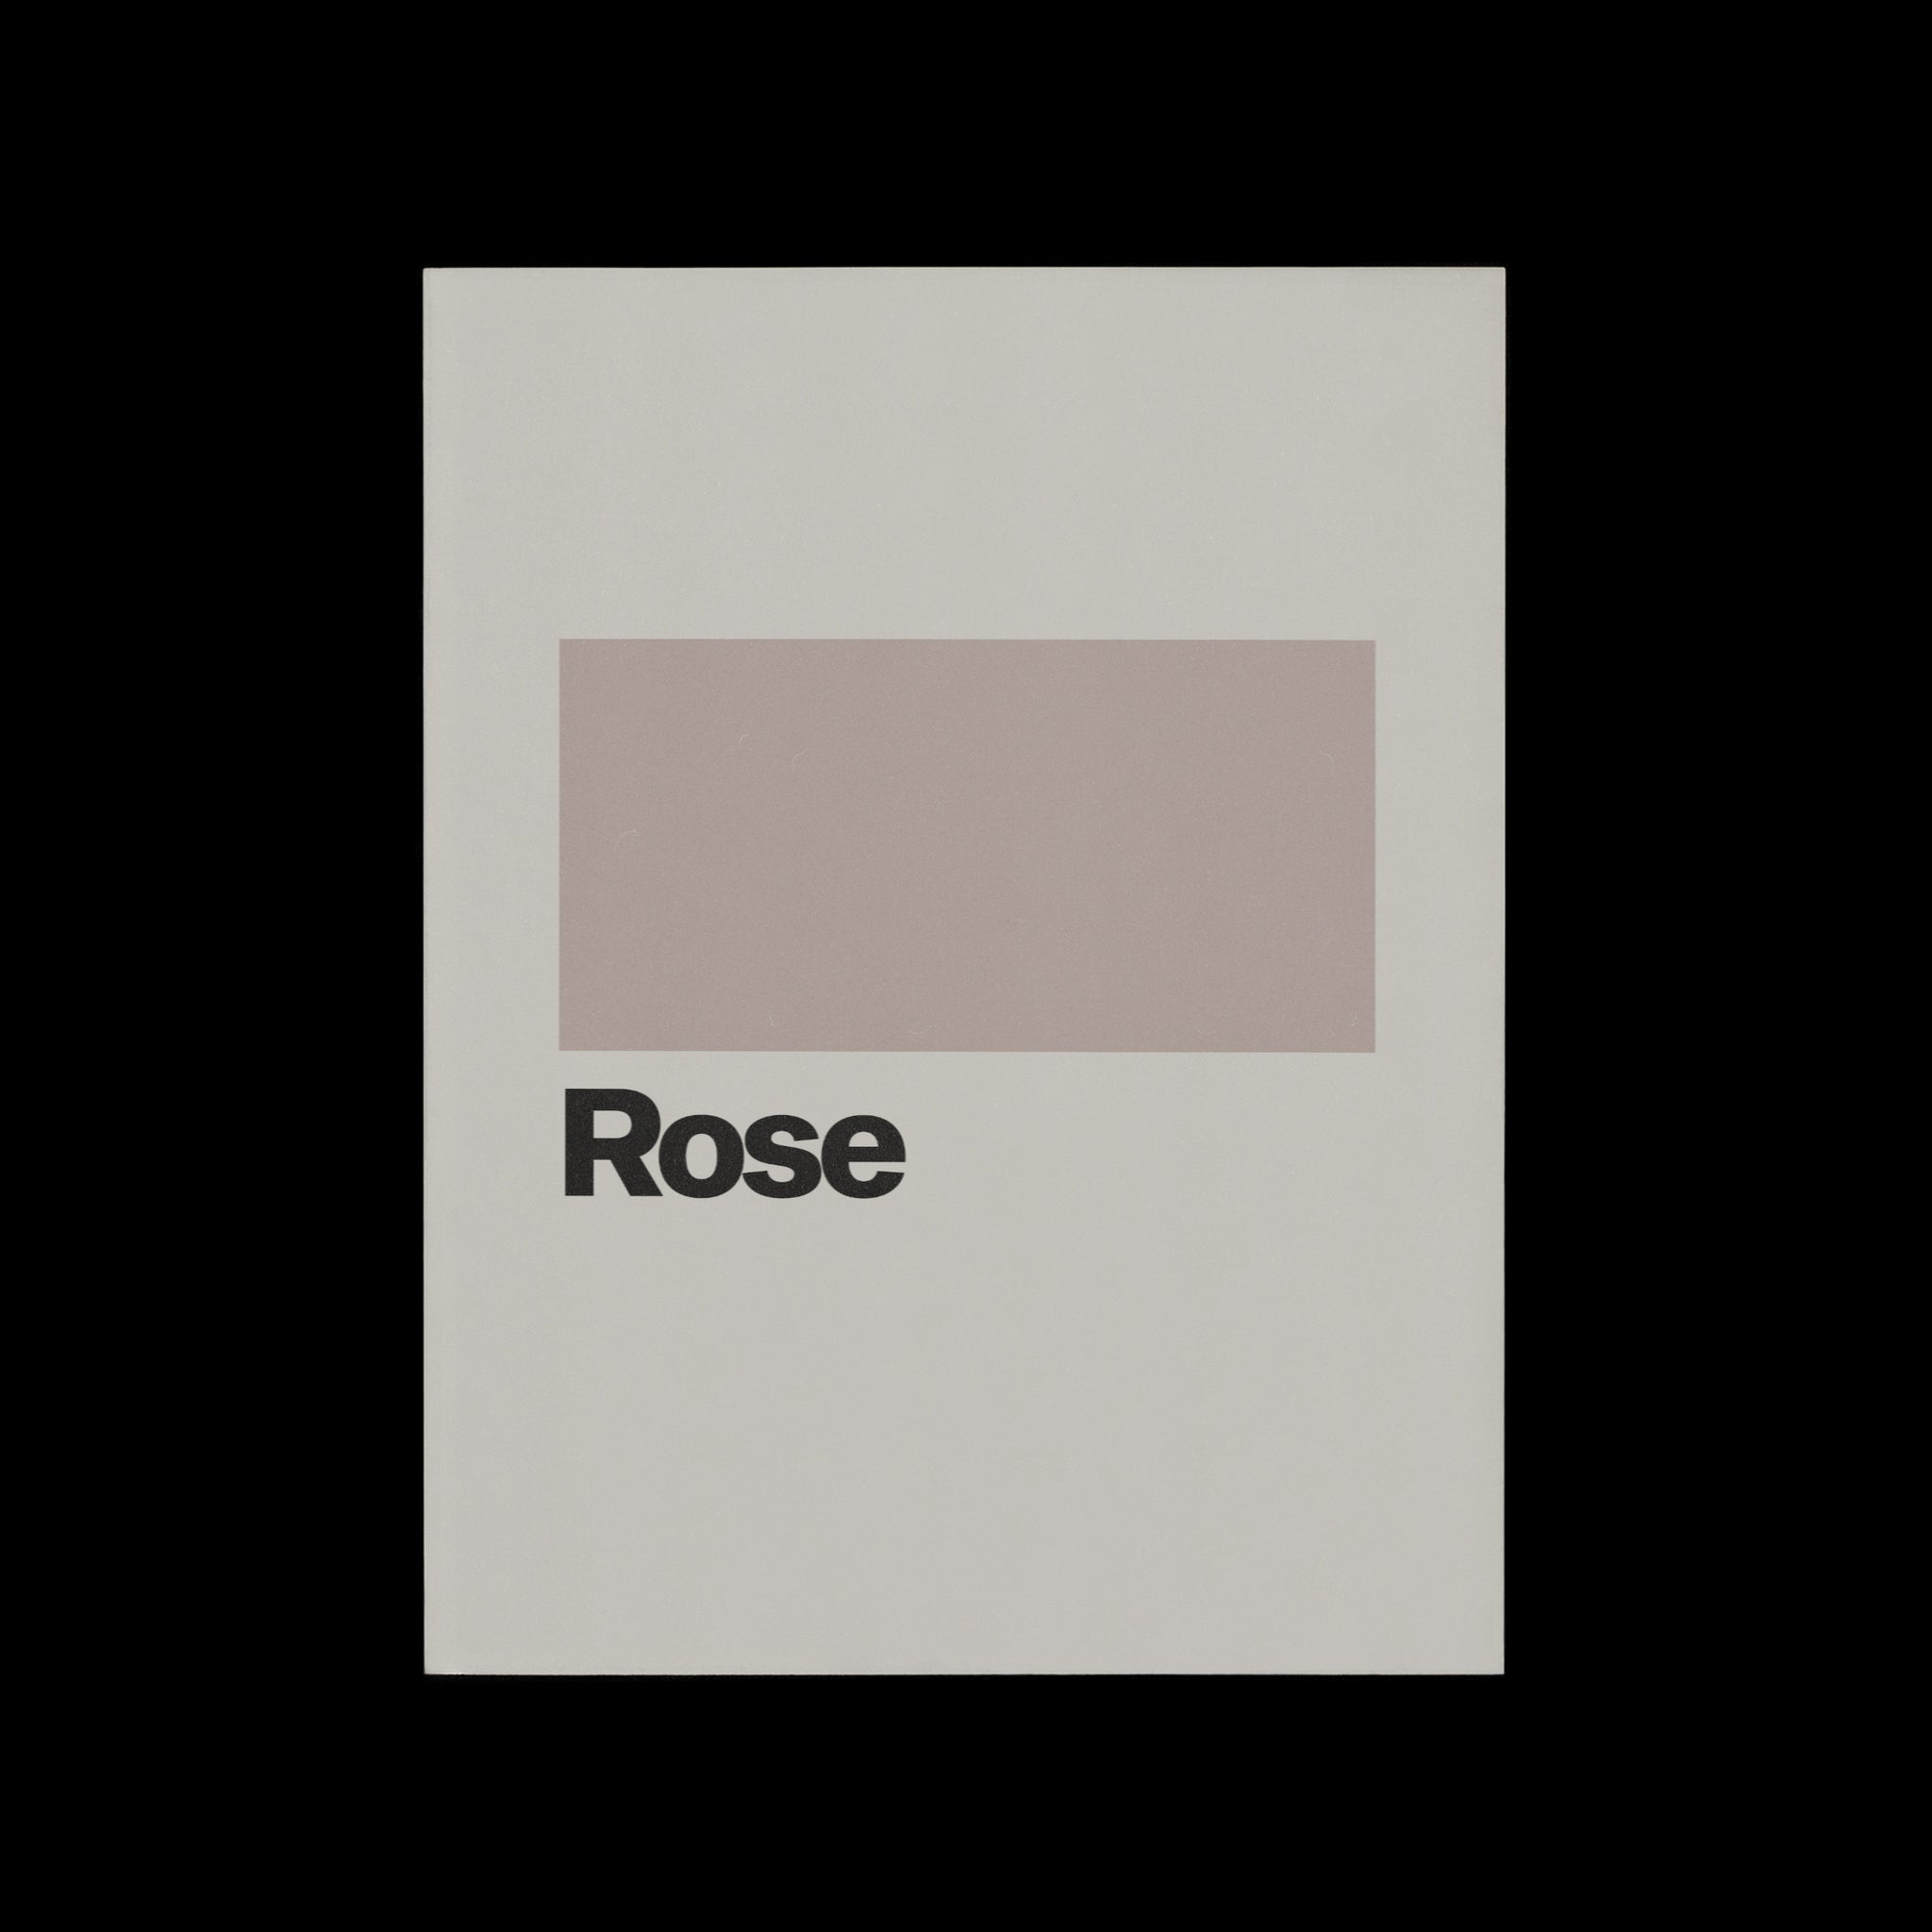 © les muses /  Palette is a collection of wall art prints highlighting individual shades of color inspired by eyeshadow colors. perfect for a modern and minimalist style gallery wall. The pastel color block posters have a minimal aesthetic and come in an array of dreamy colors.